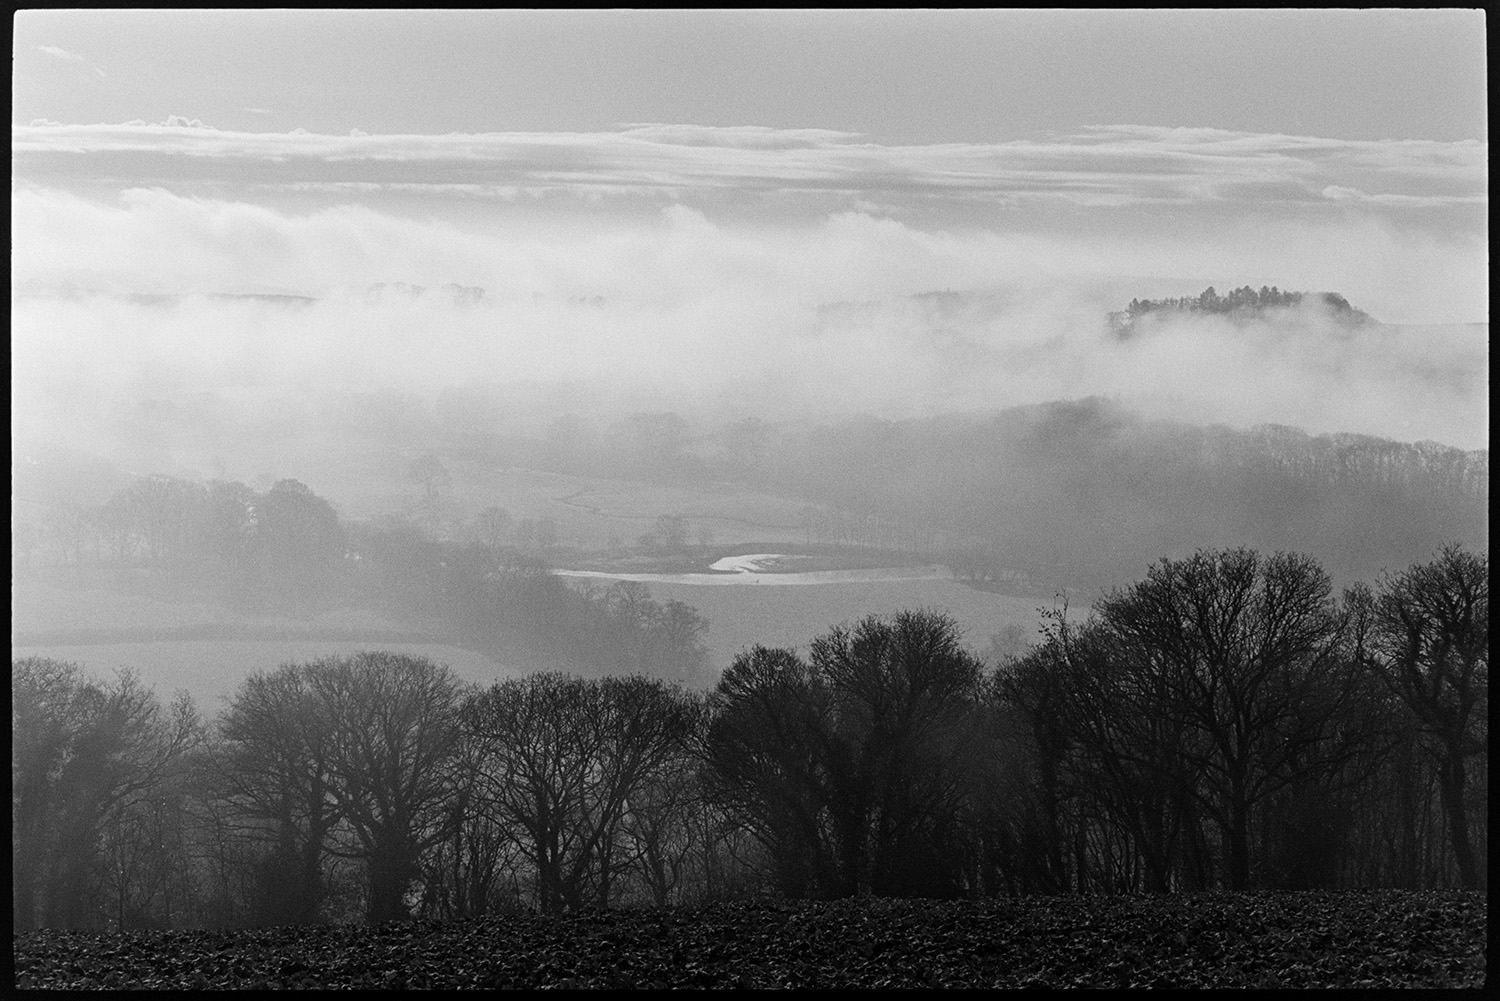 Misty early morning with trees and sunrise over distant moor. 
[A misty landscape with trees, fields and possibly the River Torridge at Harepath, Beaford, in the morning. Dartmoor can just be seen on the horizon, through the mist.]